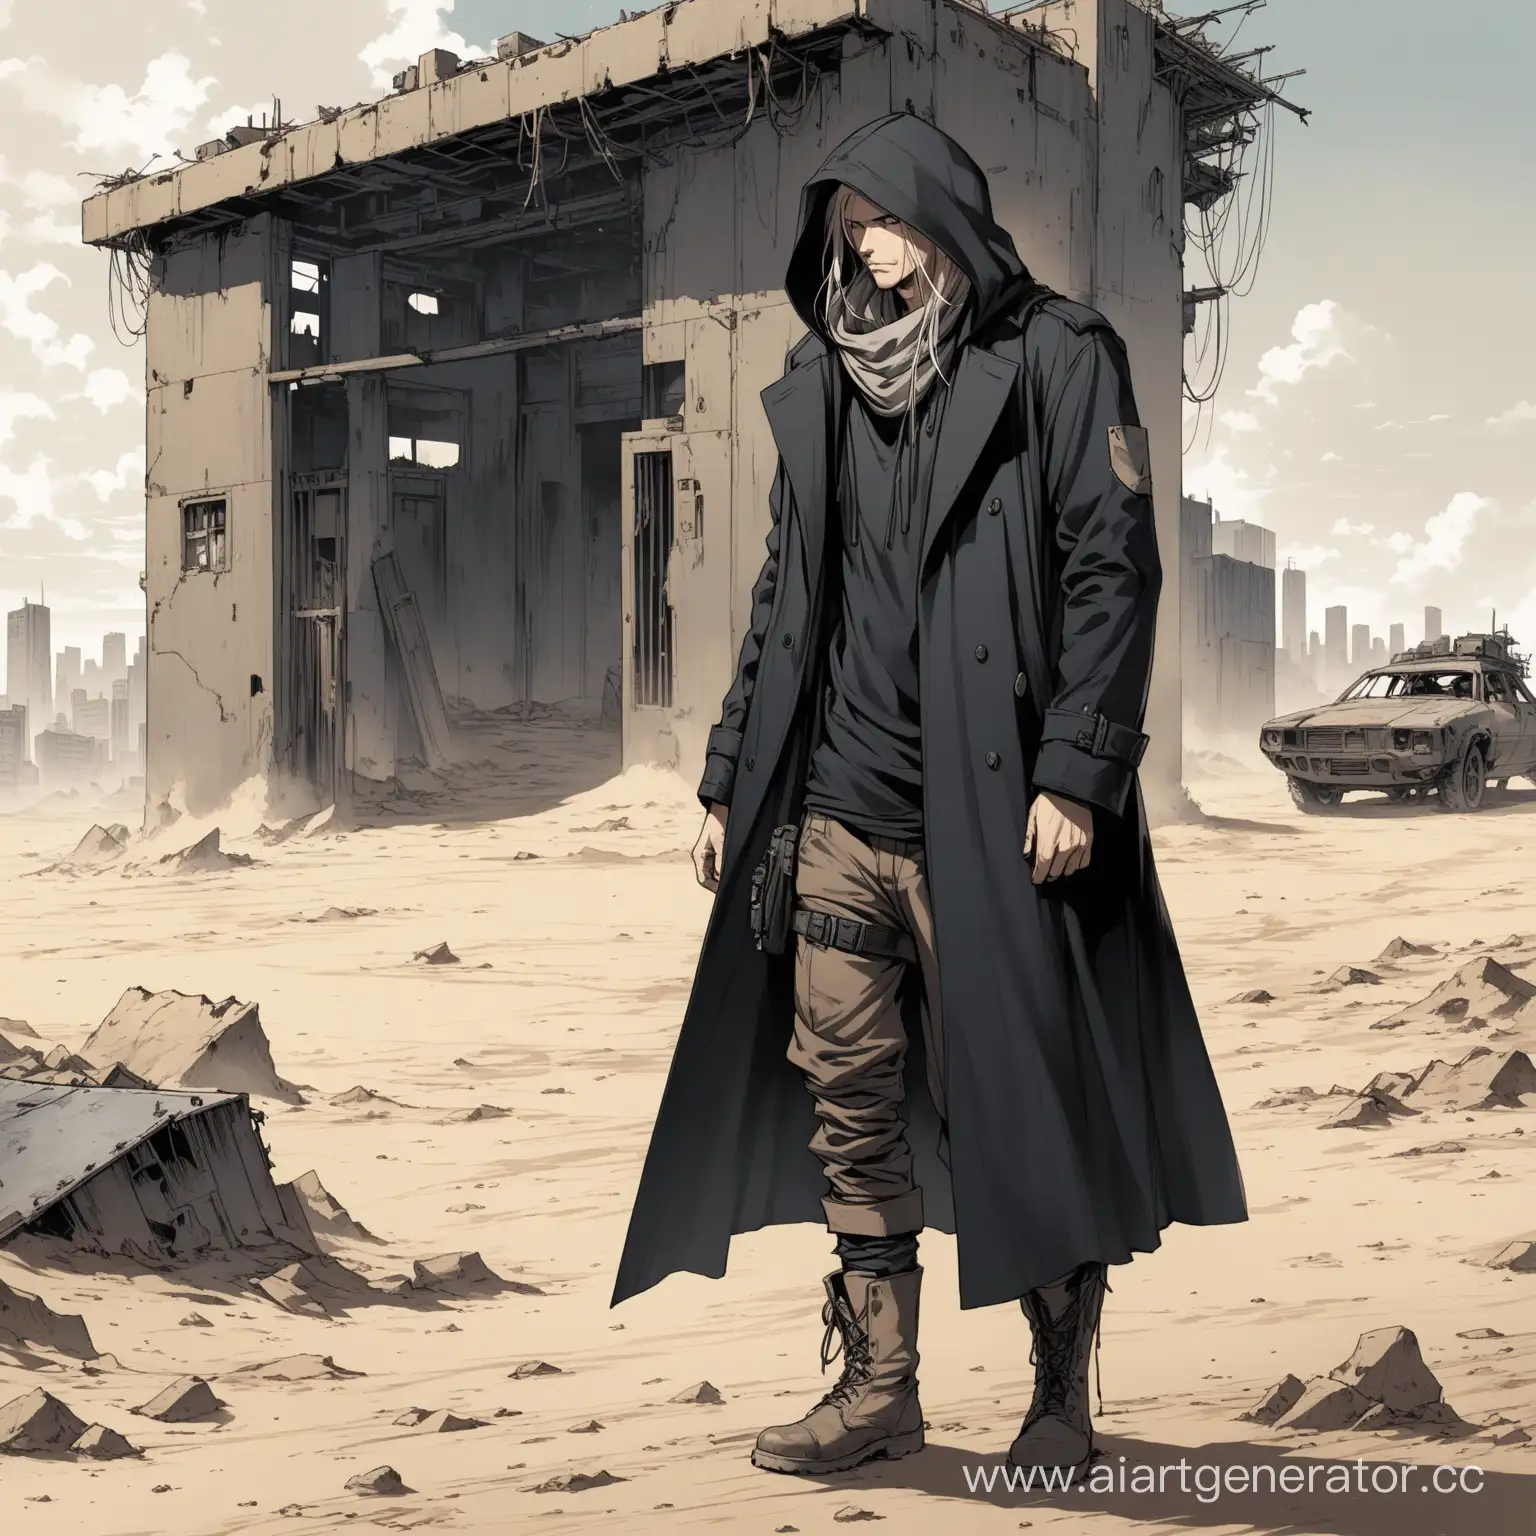 Mysterious-Figure-in-Overcoat-and-SandToned-Boots-Amidst-PostApocalyptic-Ruins